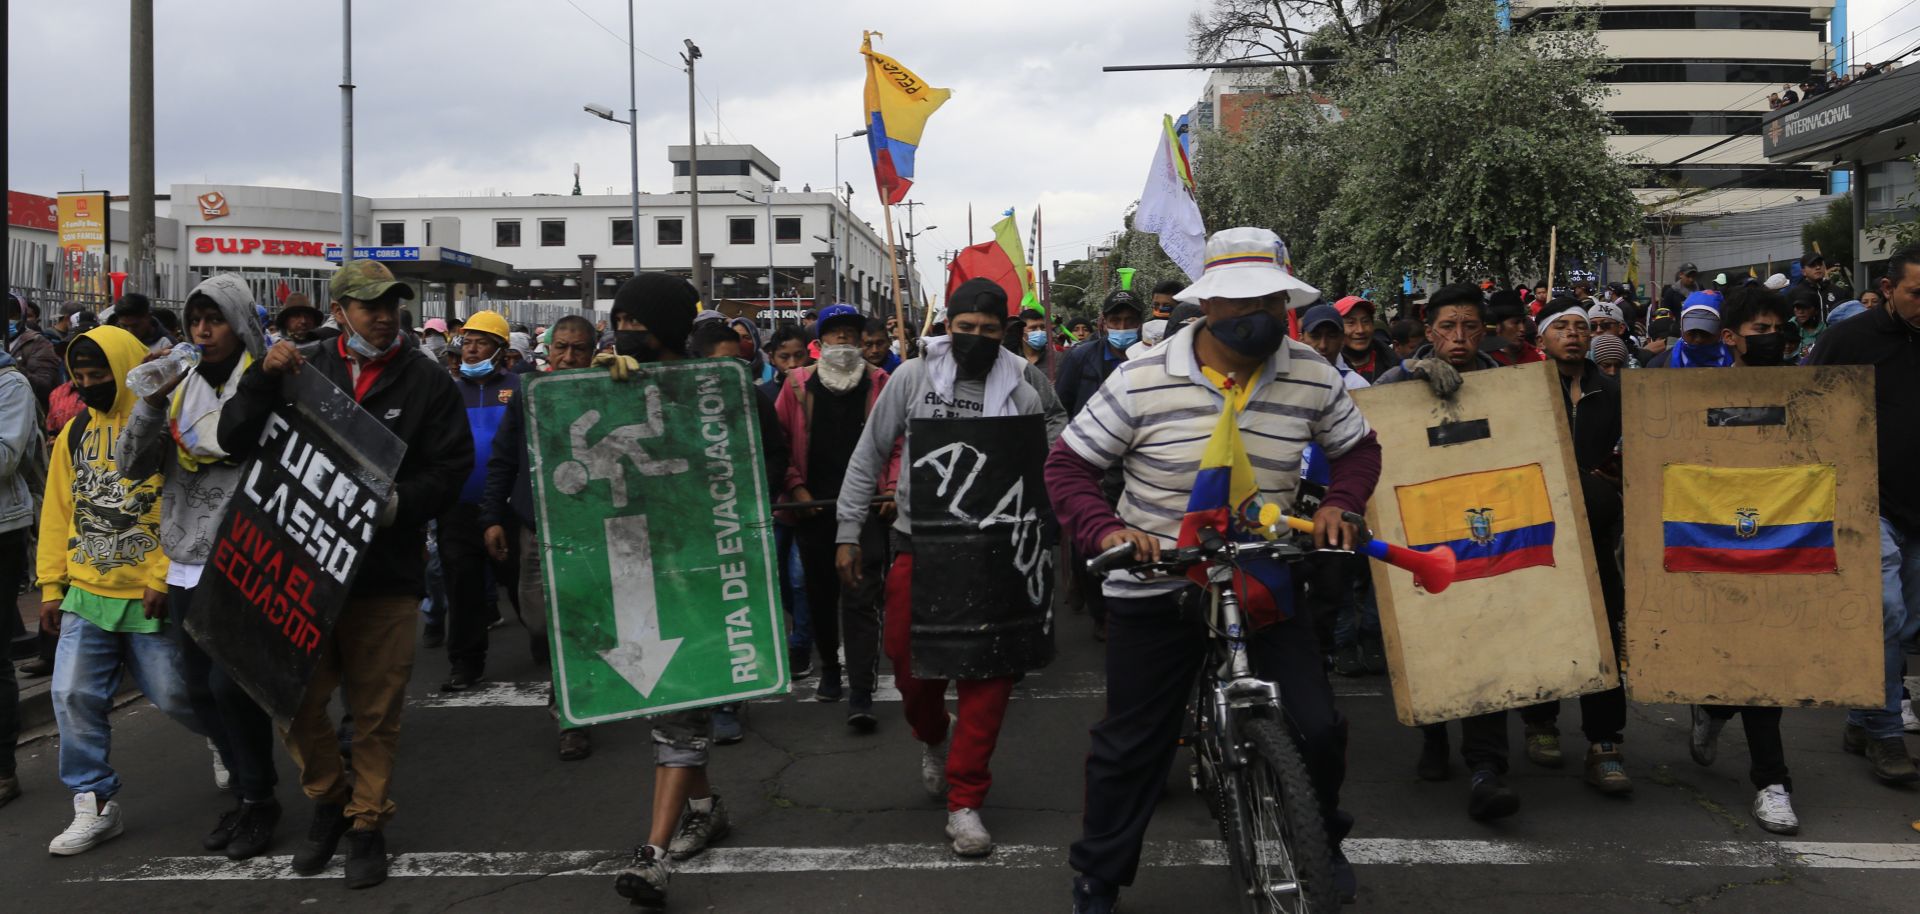 Demonstrators carry makeshift shields during the tenth day of protests against the administration of Ecuadorian President Guillermo Lasso on June 22, 2022, in Quito, Ecuador.